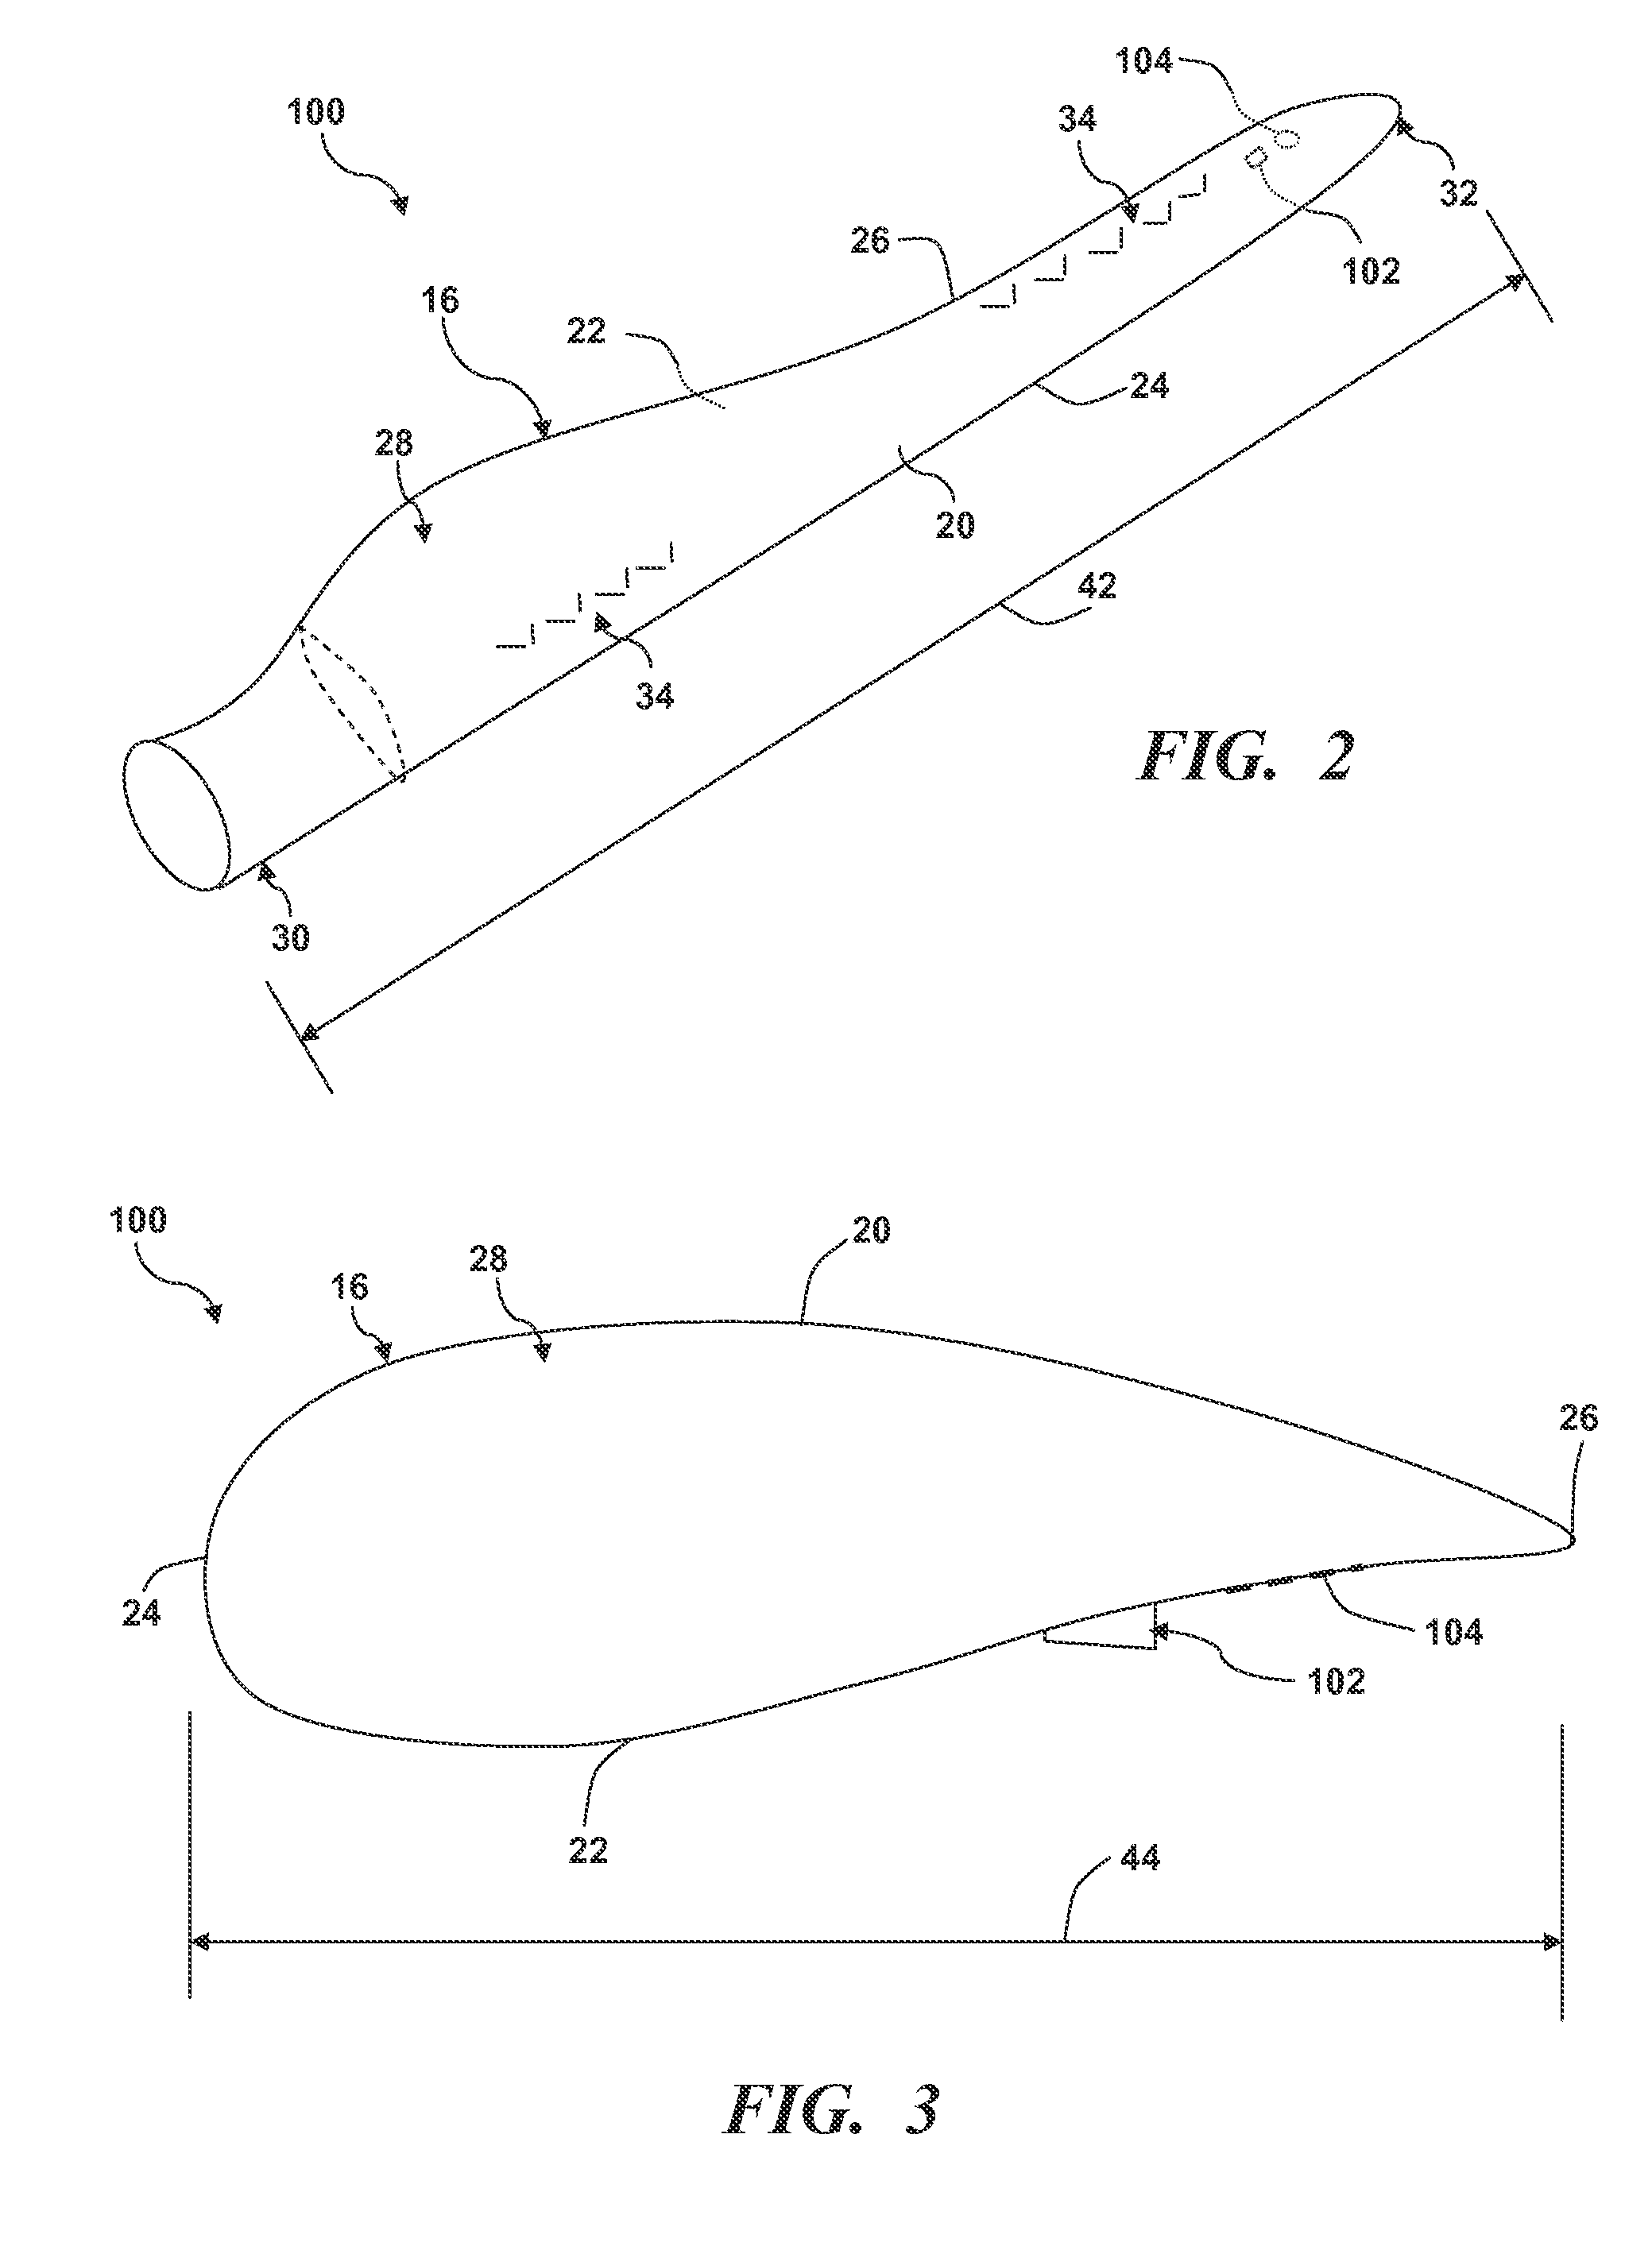 Airflow modifying element for suppressing airflow noise